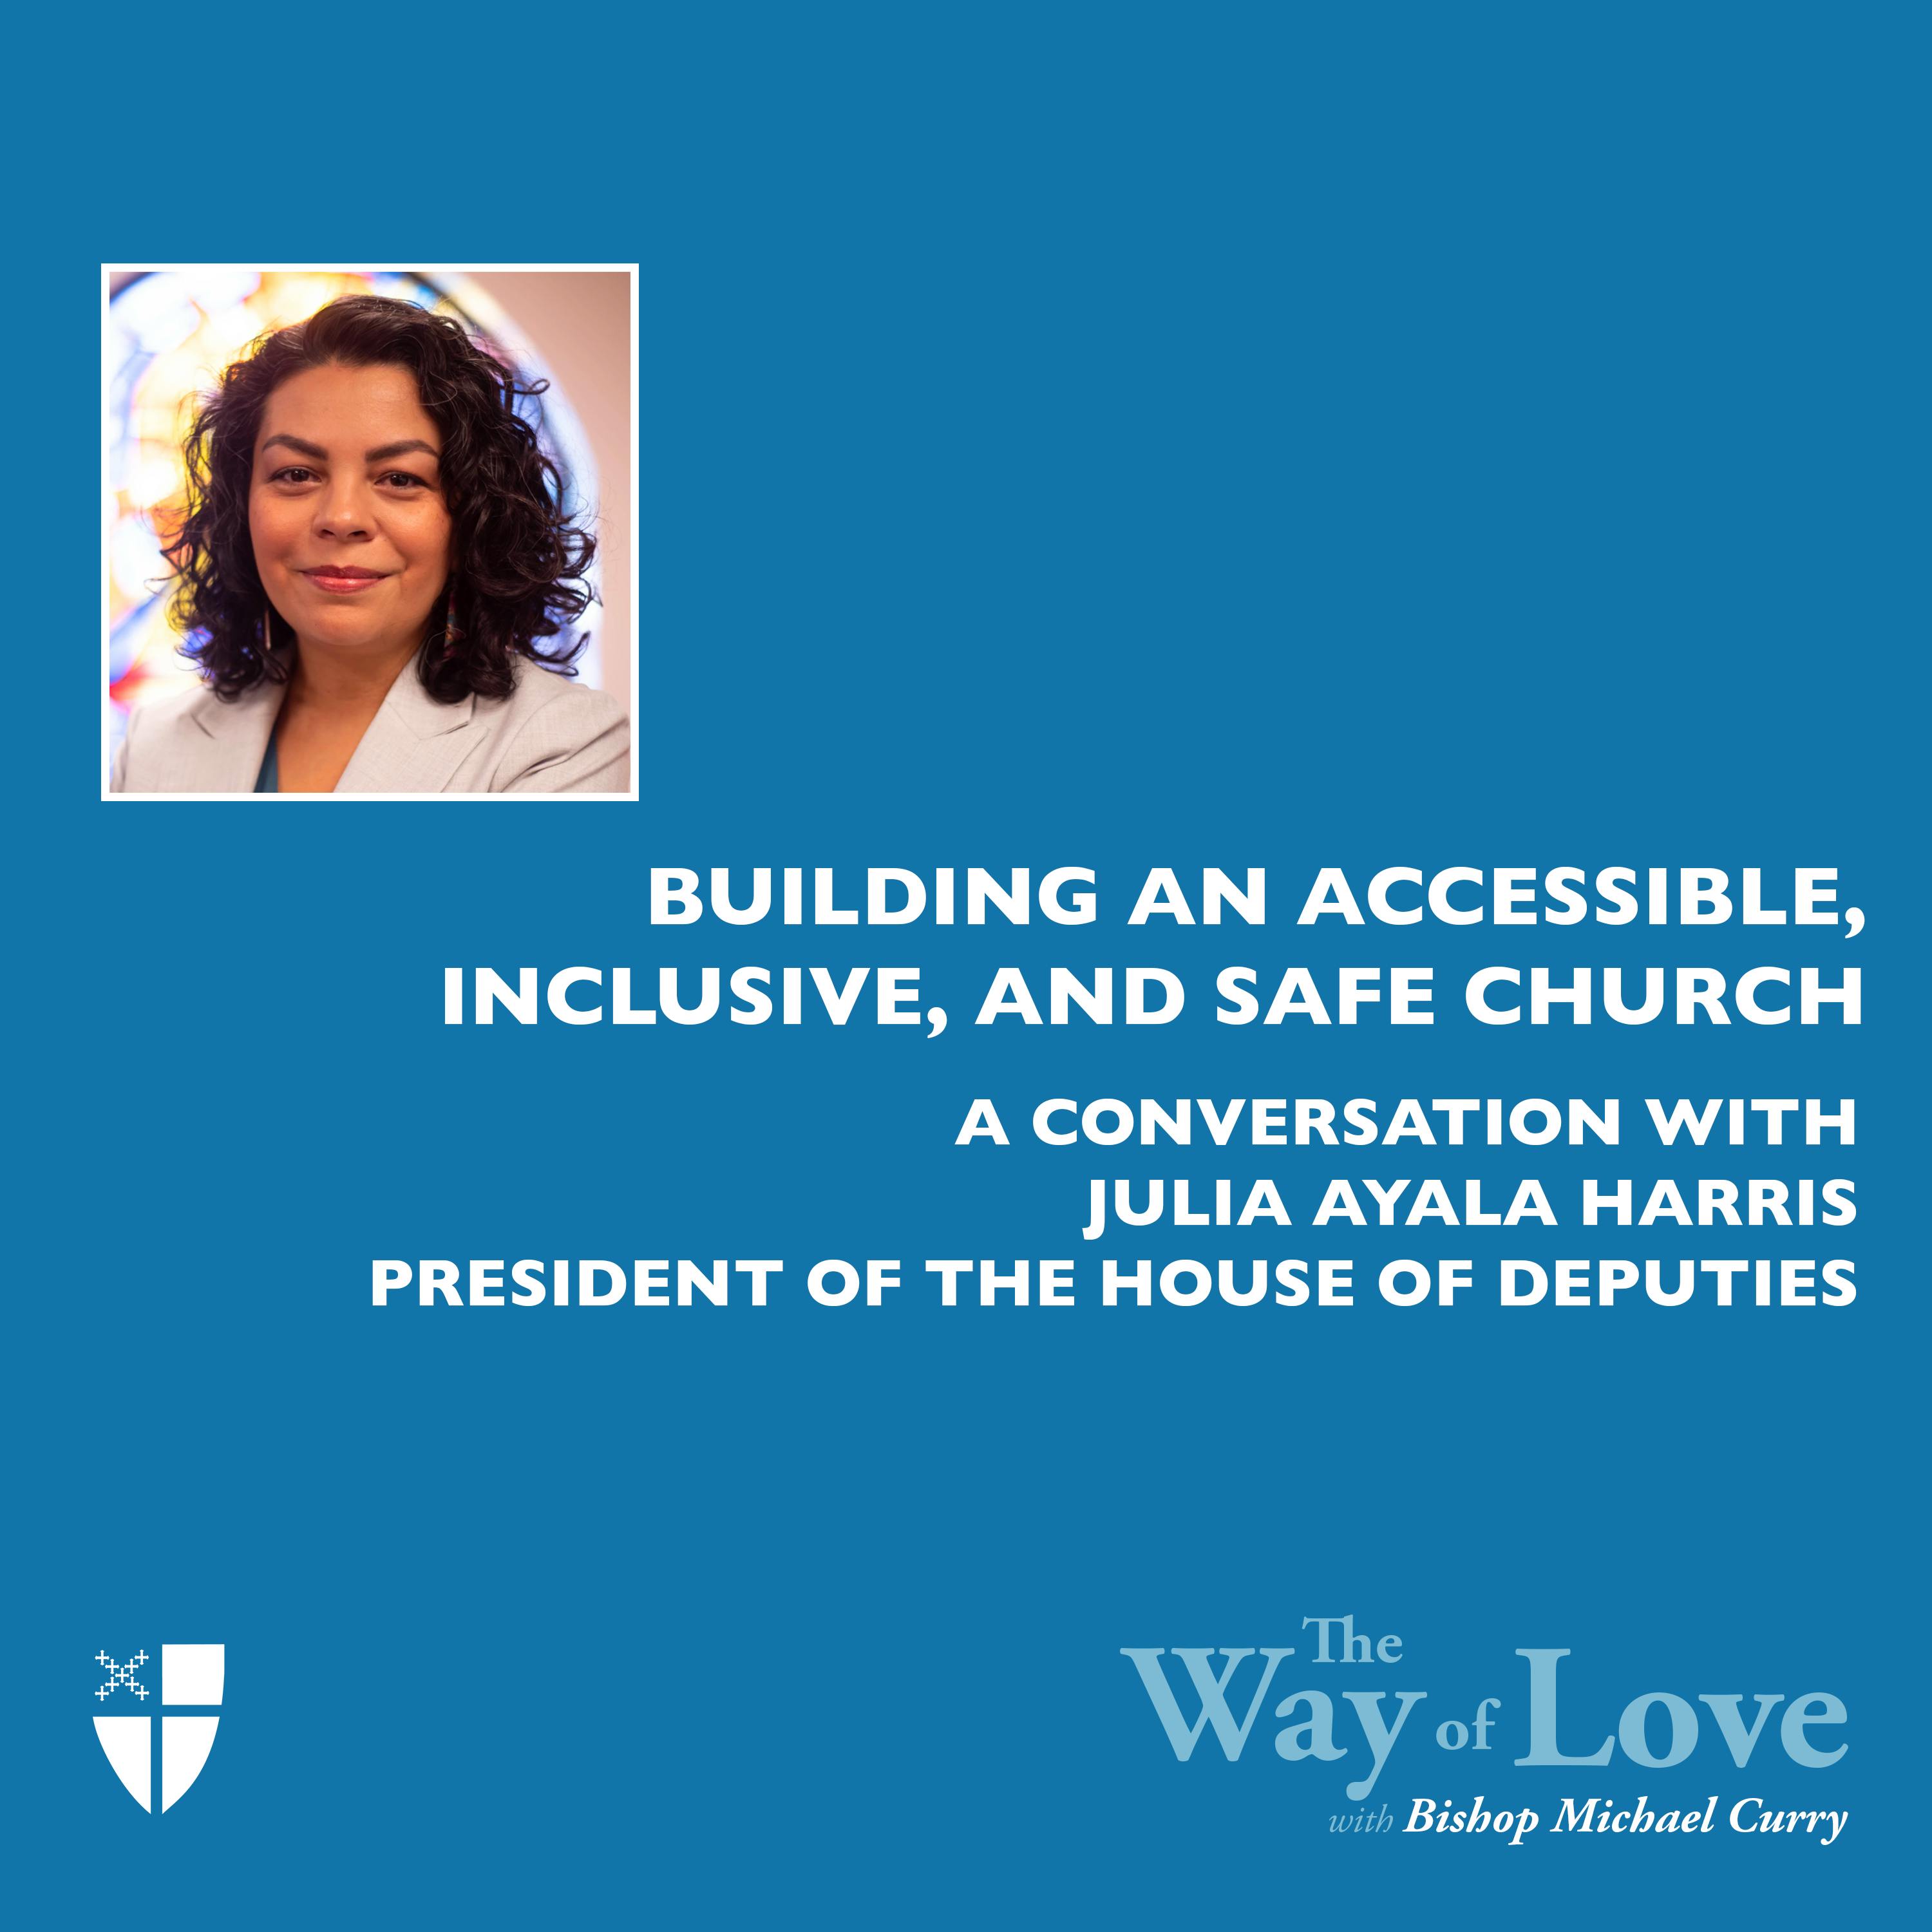 Building an Accessible, Inclusive, and Safe Church with Julia Ayala Harris